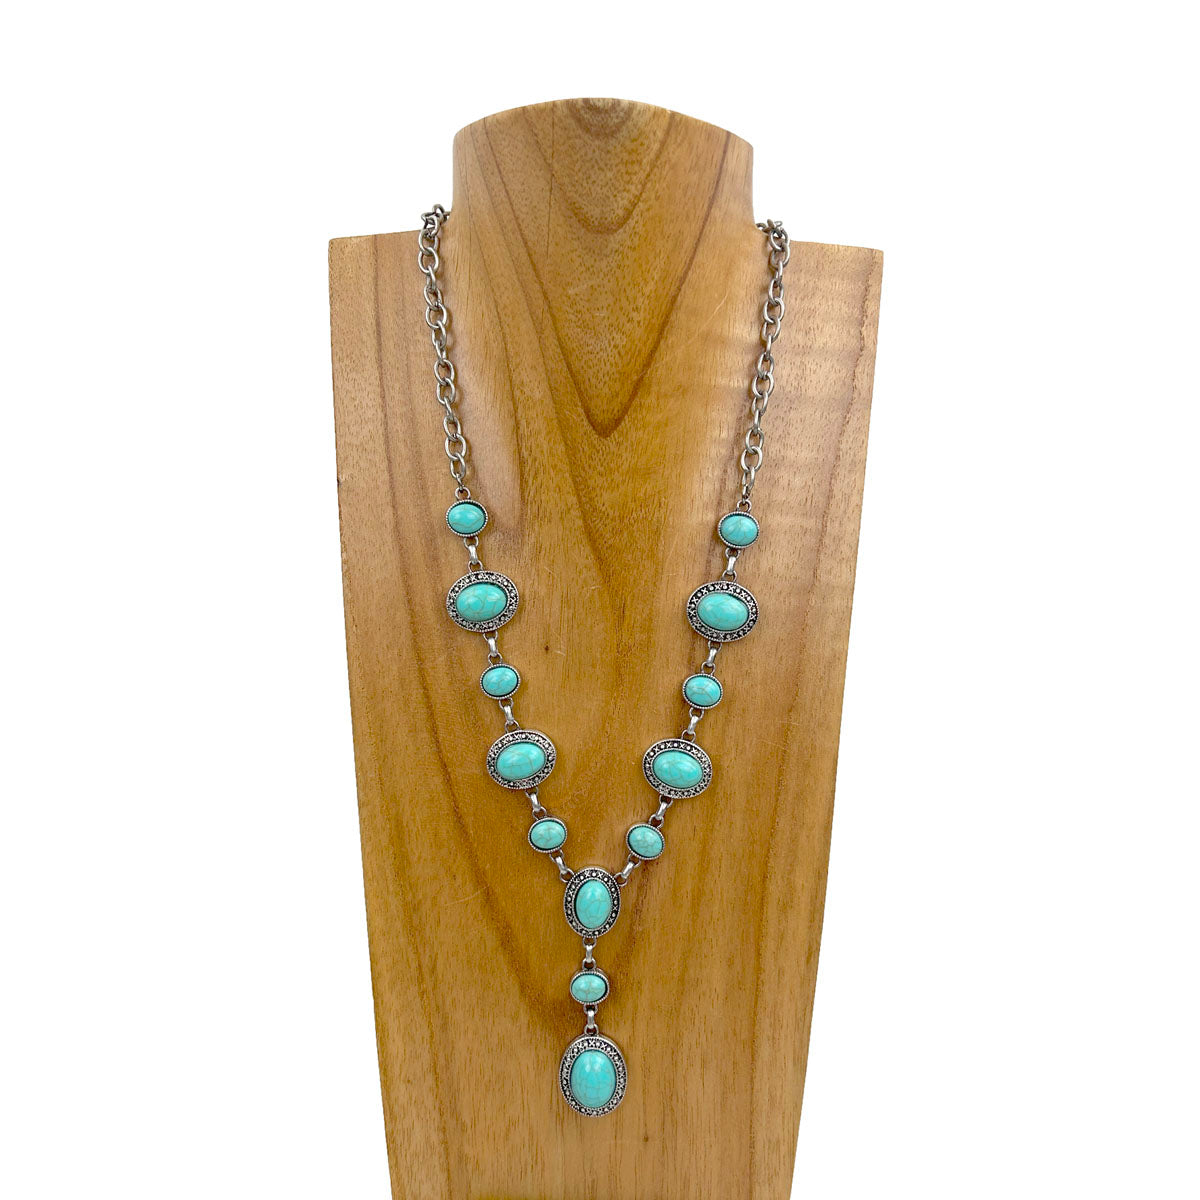 NKY230910-16-BLUE          20 inches silver metal chain with blue oval turquoise stone" Y" shape Necklace